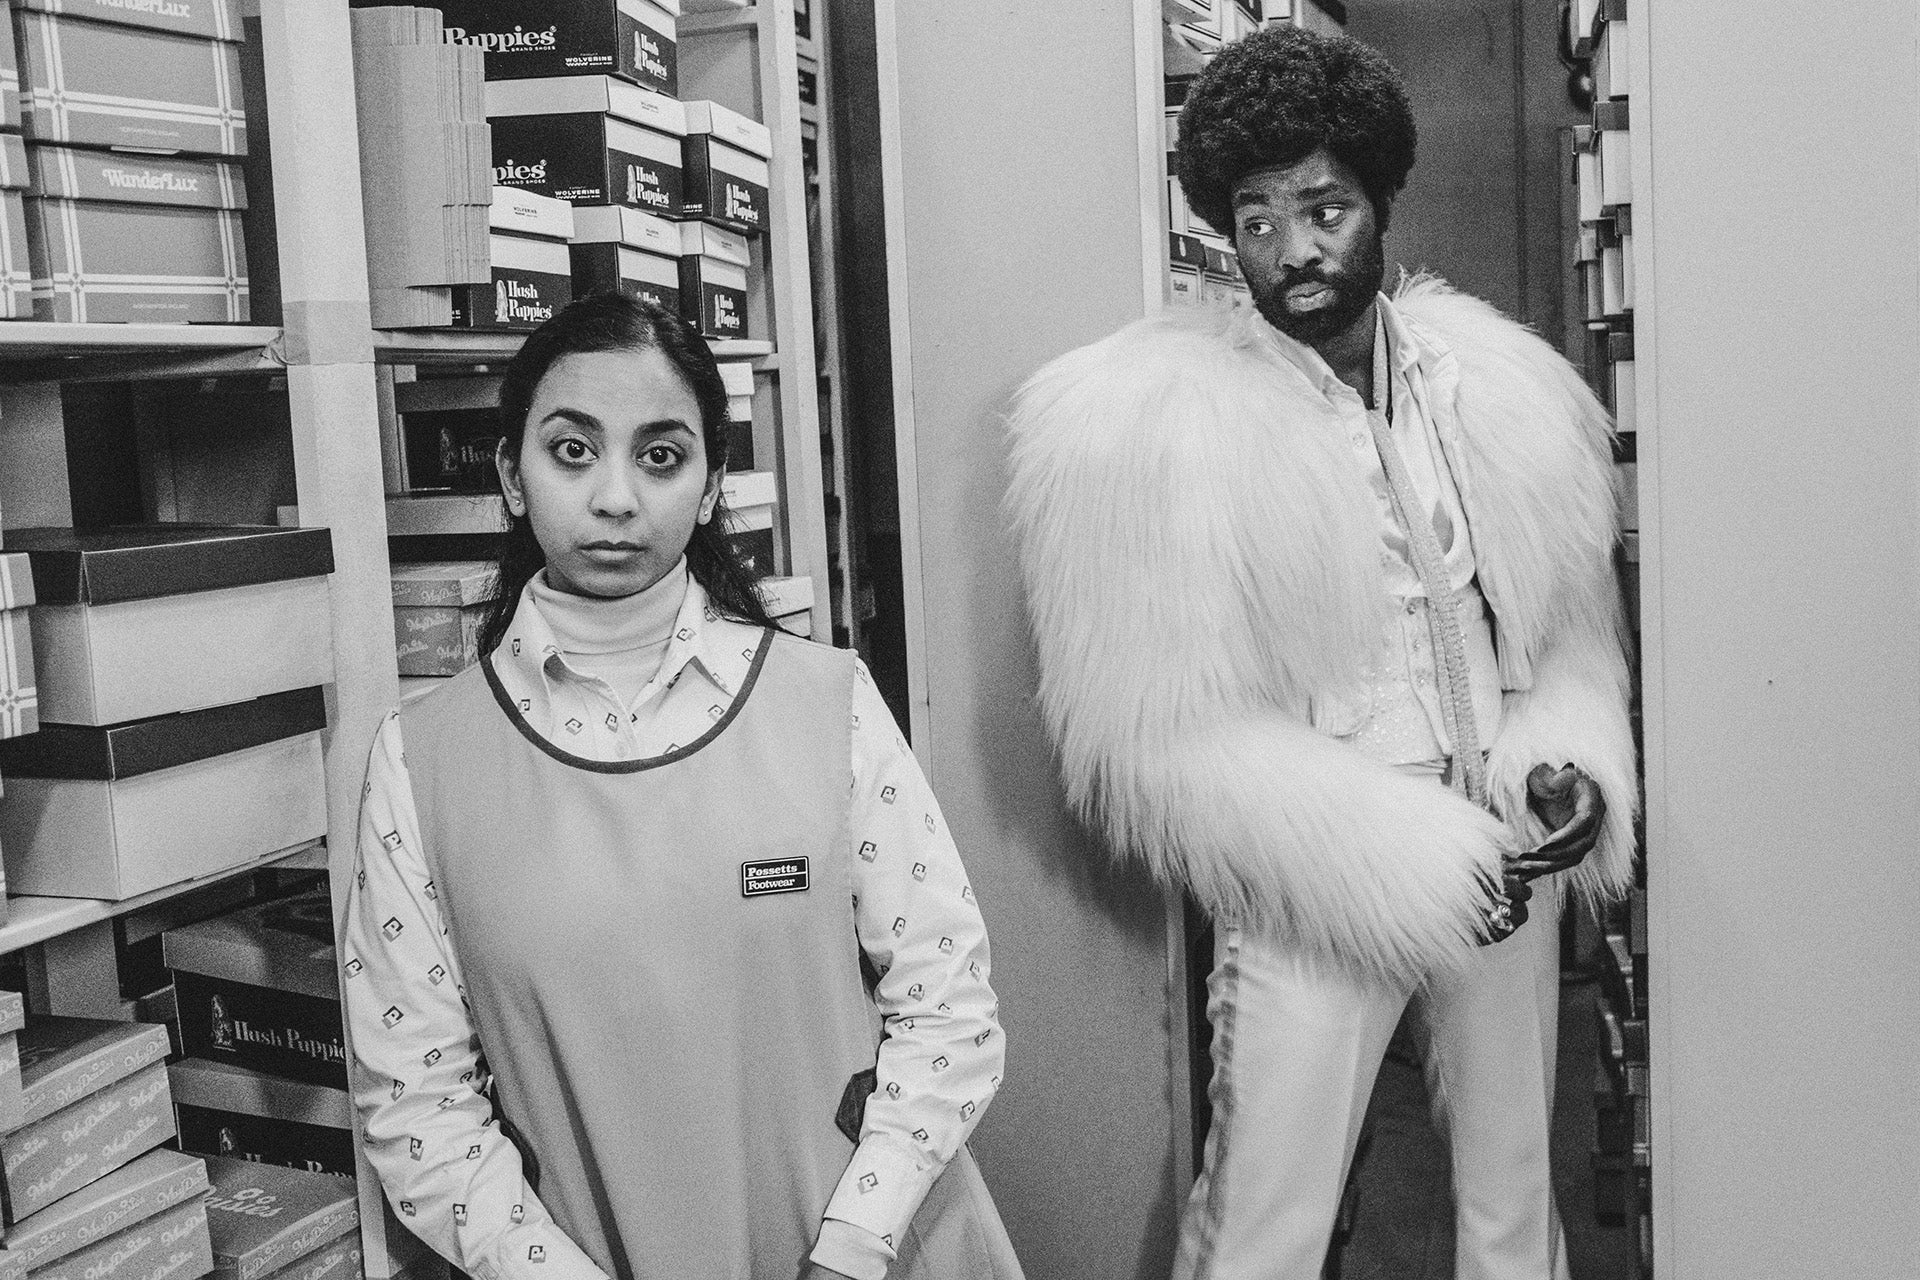 Black and white photograph by David Hurn showing Black Mirror stars Paapa Essiedu in a light feather jacket and slim trousers, looking at co-star Anjana Vasan wearing a shop assistant's bib and collored shirt